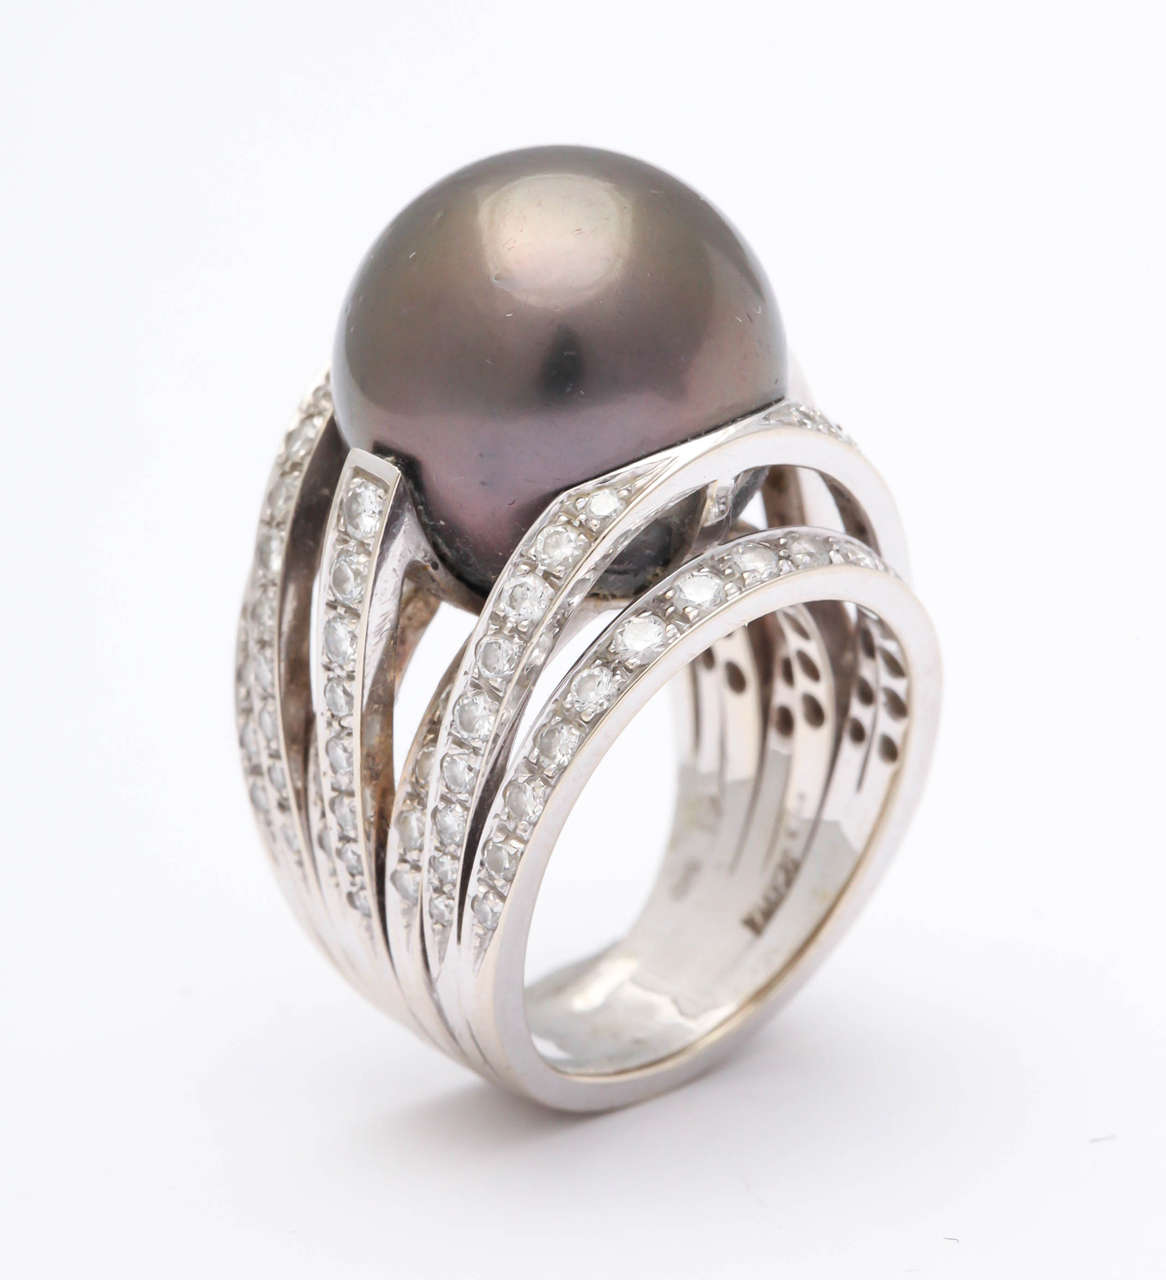 Sumptuous constructed Ring with a 13mm South Sea Pearl Ring floating on a nest of Bands set with clean  cut  & sparkling white Diamonds. Over the top!